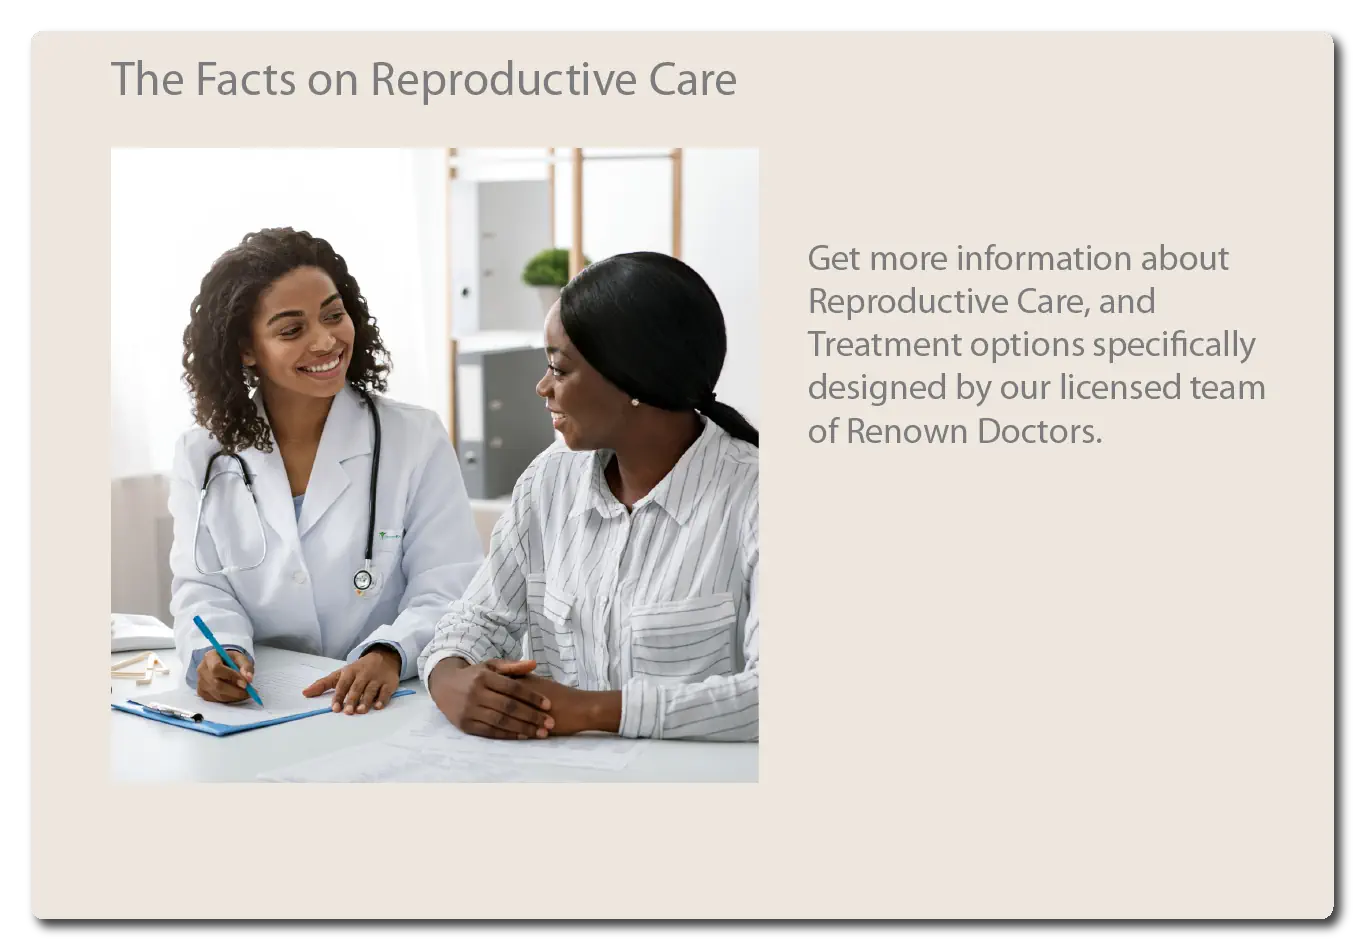 The Facts on Reproductive Care